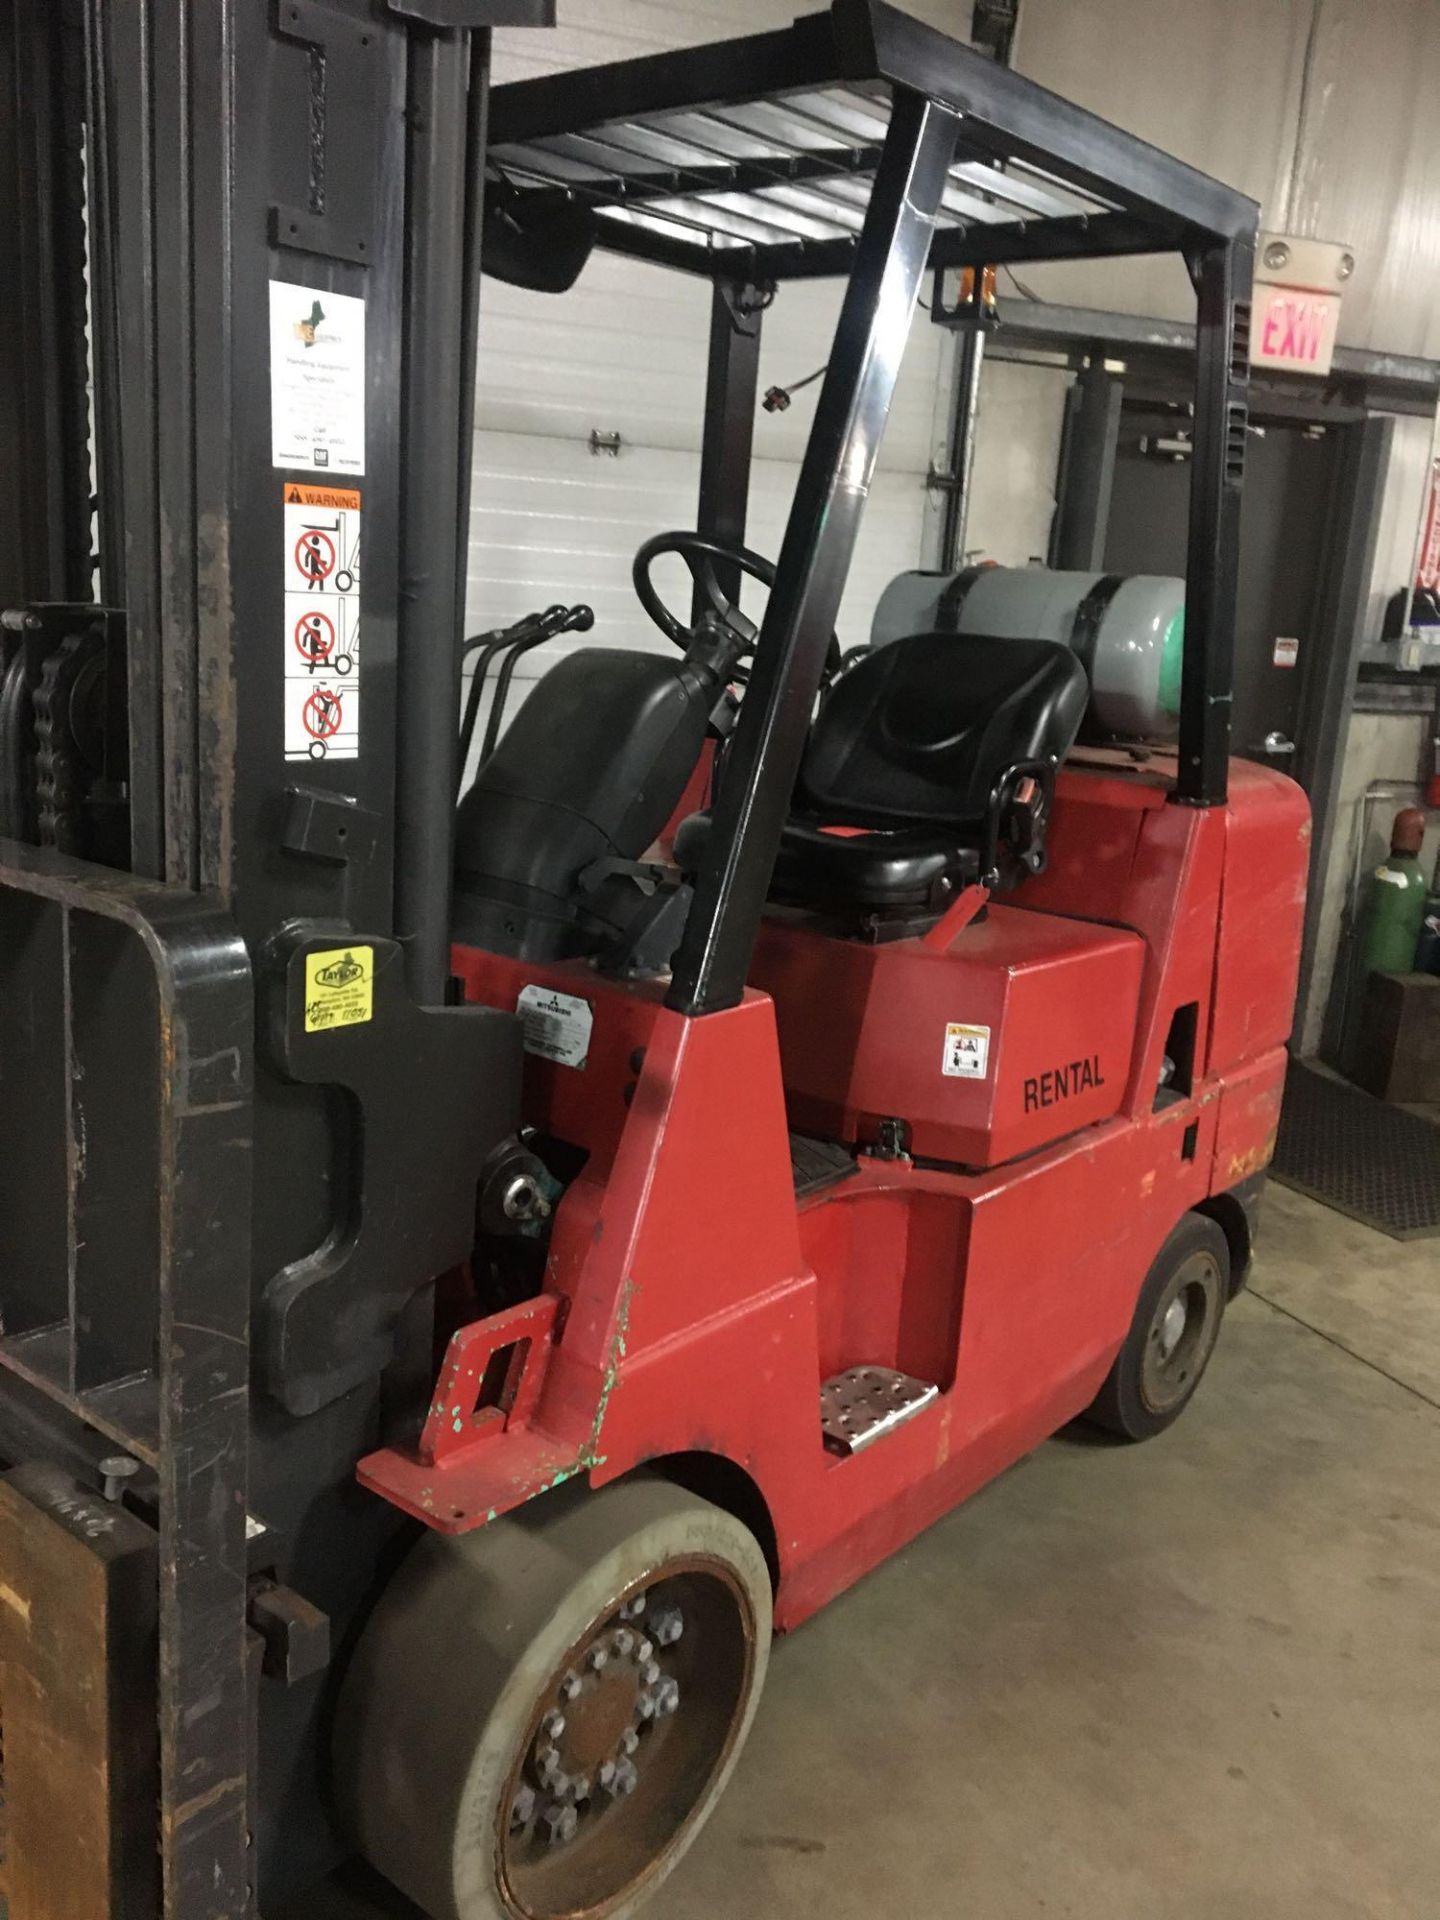 Propane Forklift, Mitsubishi, FGC40K, Max Ht 209", Max Cap 7100lbs, 11053 Hrs Started and Moved. - Image 3 of 9